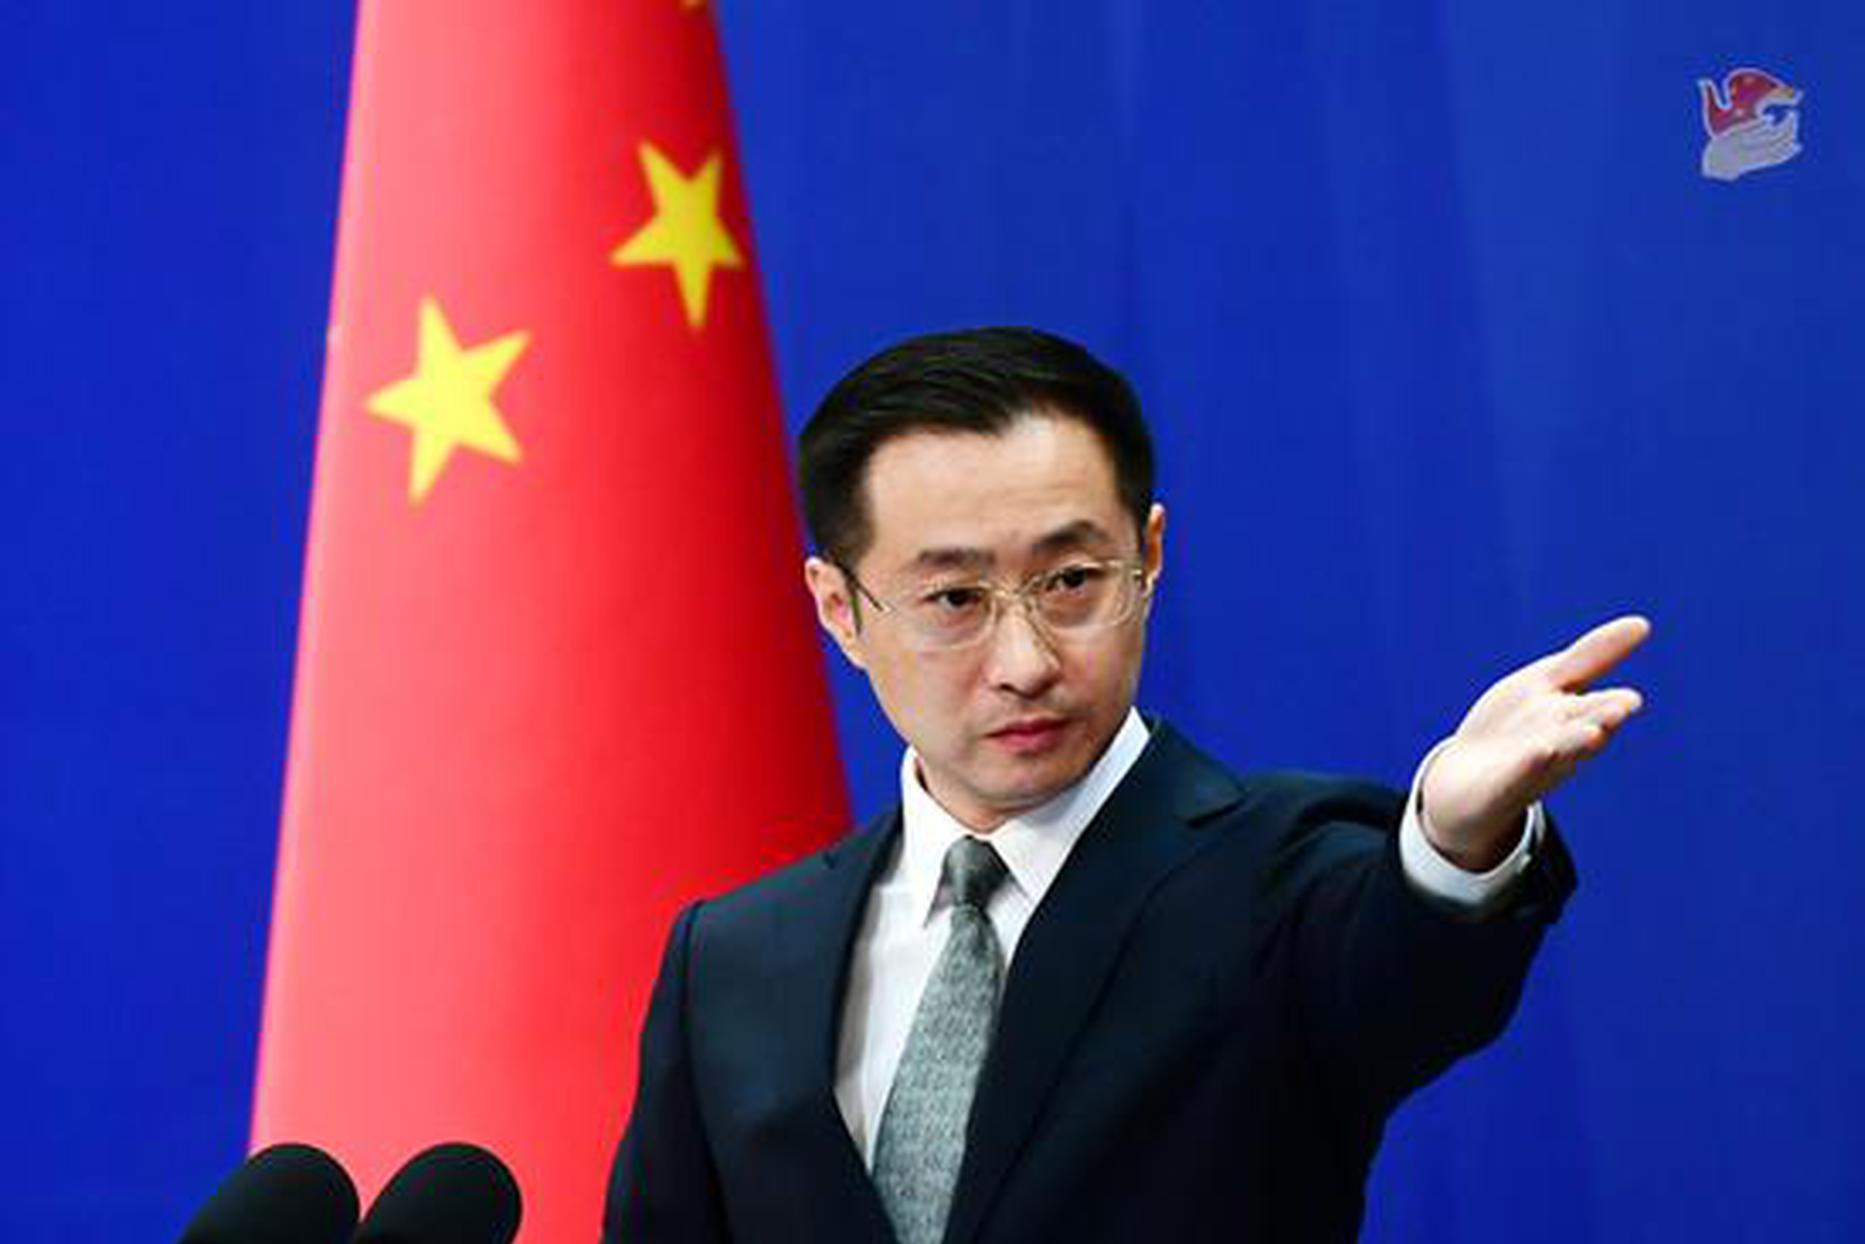 China stands ready to work with Pakistan to build an upgraded CPEC: spokesperson 